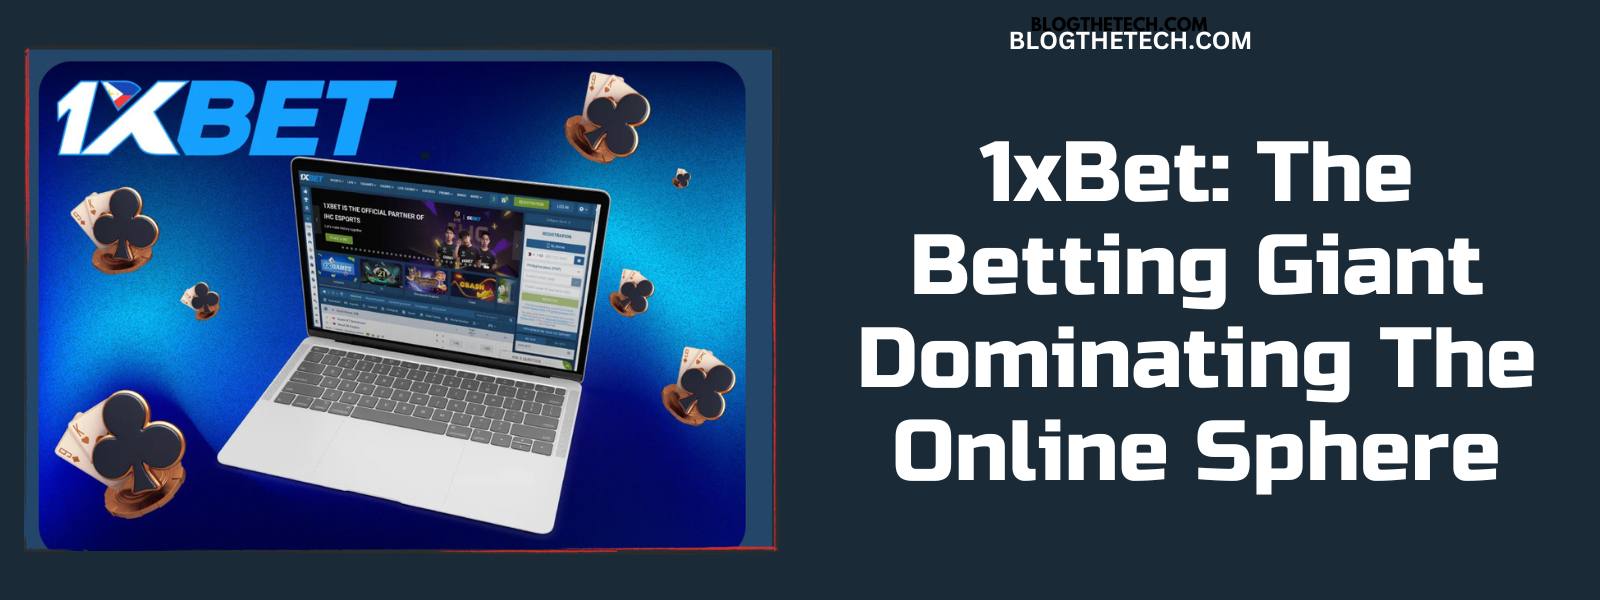 1xBet-Betting-Giant-Dominating-Online-Sphere-Featured